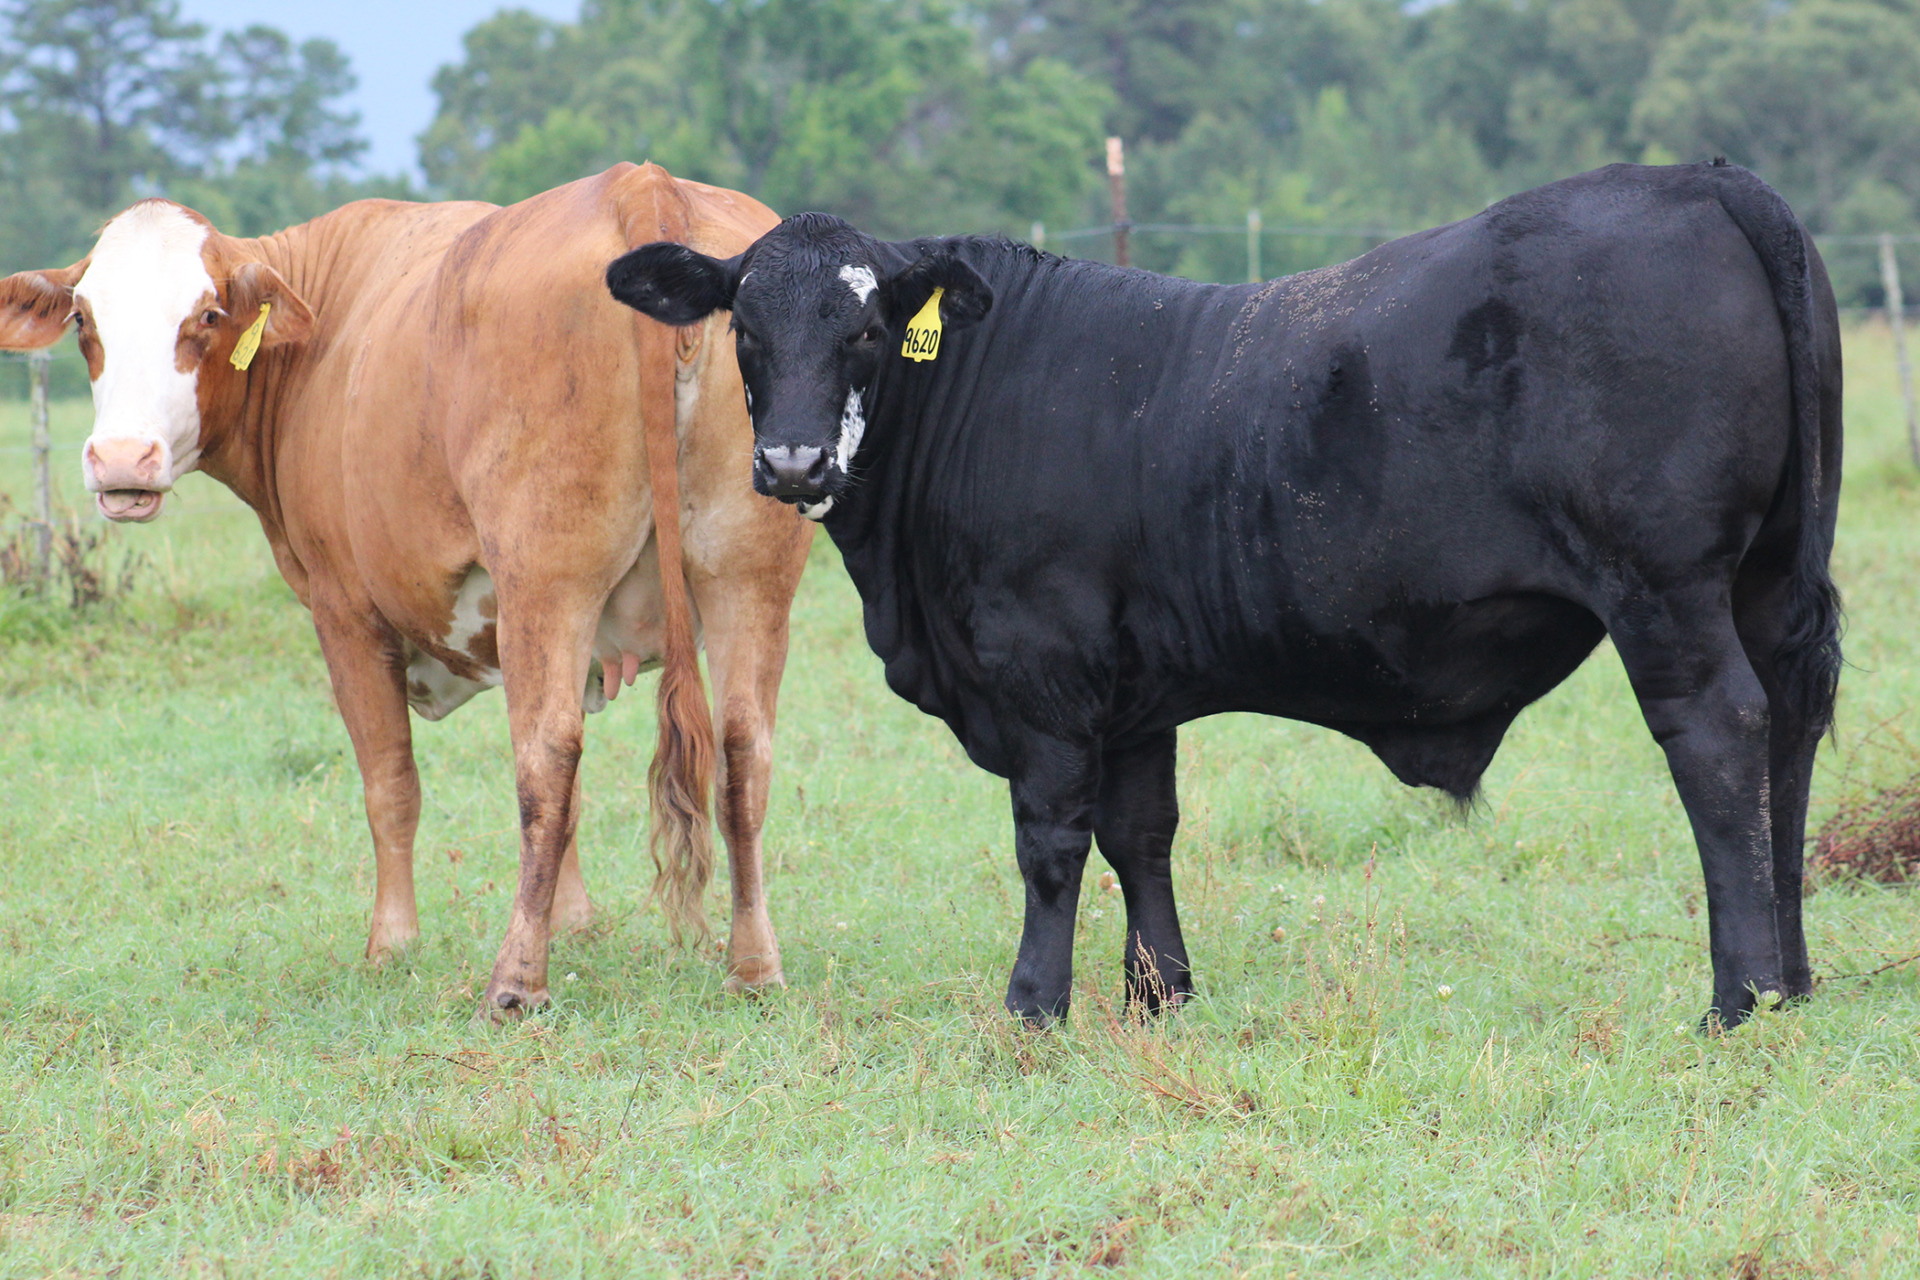 Input prices dictate pasture management decisions by livestock operators